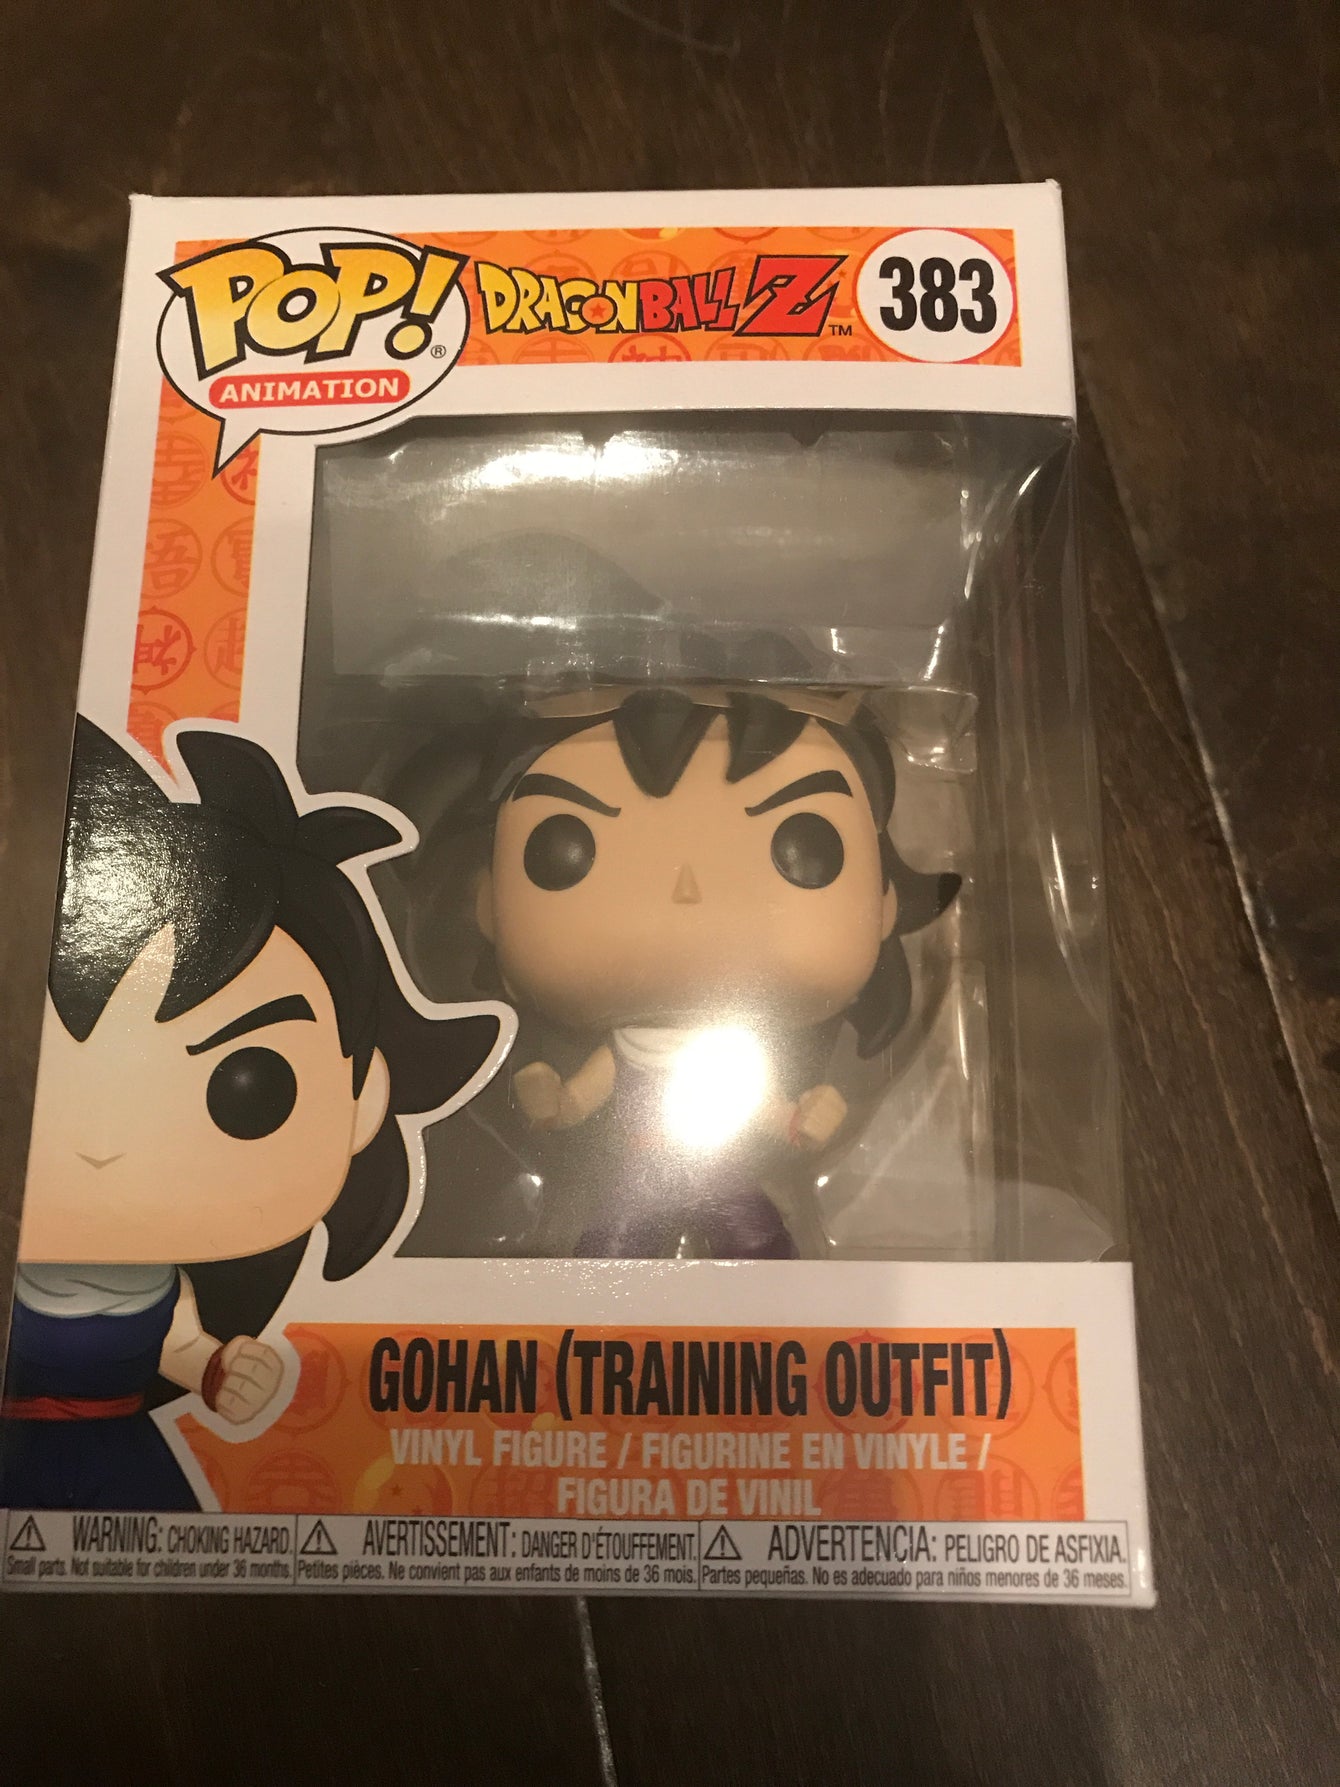 Gohan (Training Outfit) mint condition LC3